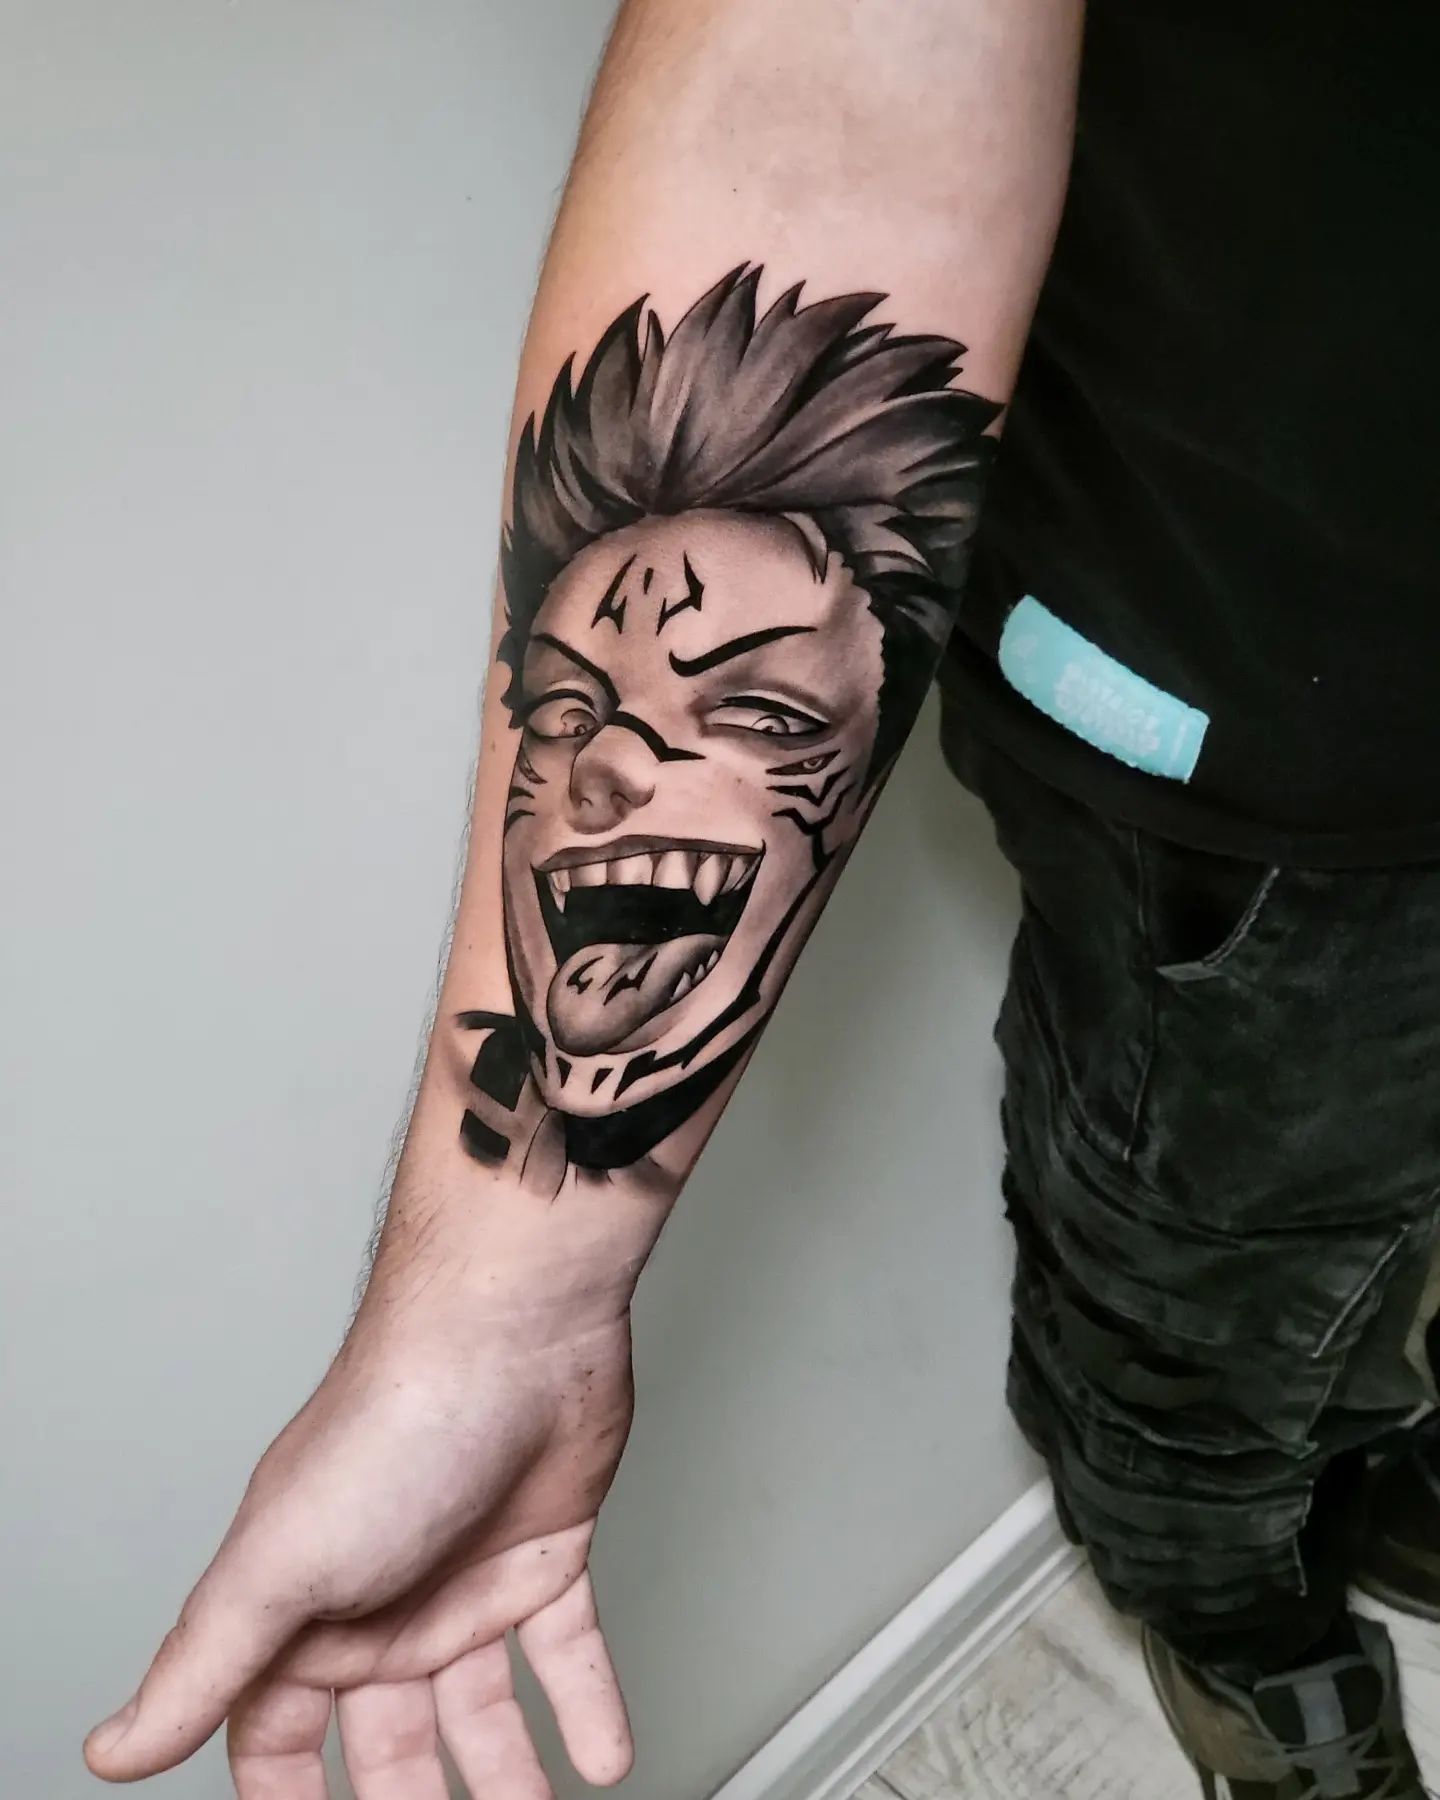 VC INK TATTOO GALLERY on Instagram Ryuk    Artist  nerdytattoo   vcinkgallery  More Works and Booking Info at   httpssmartbiovcinkgallery     ryuk